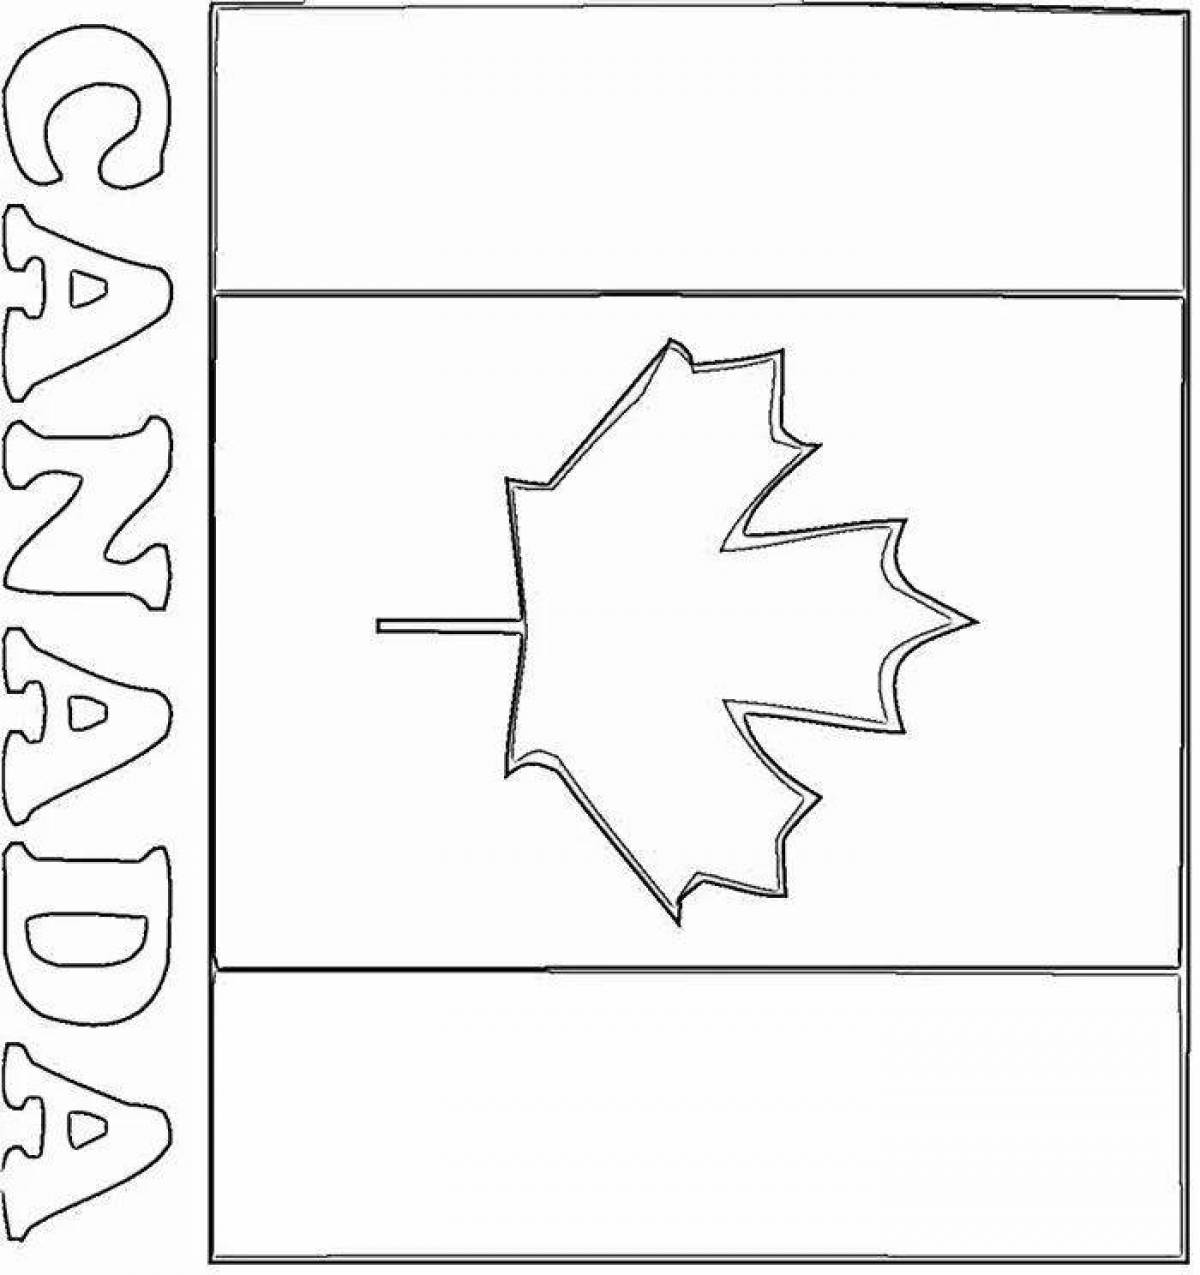 Coloring page awesome canada flag